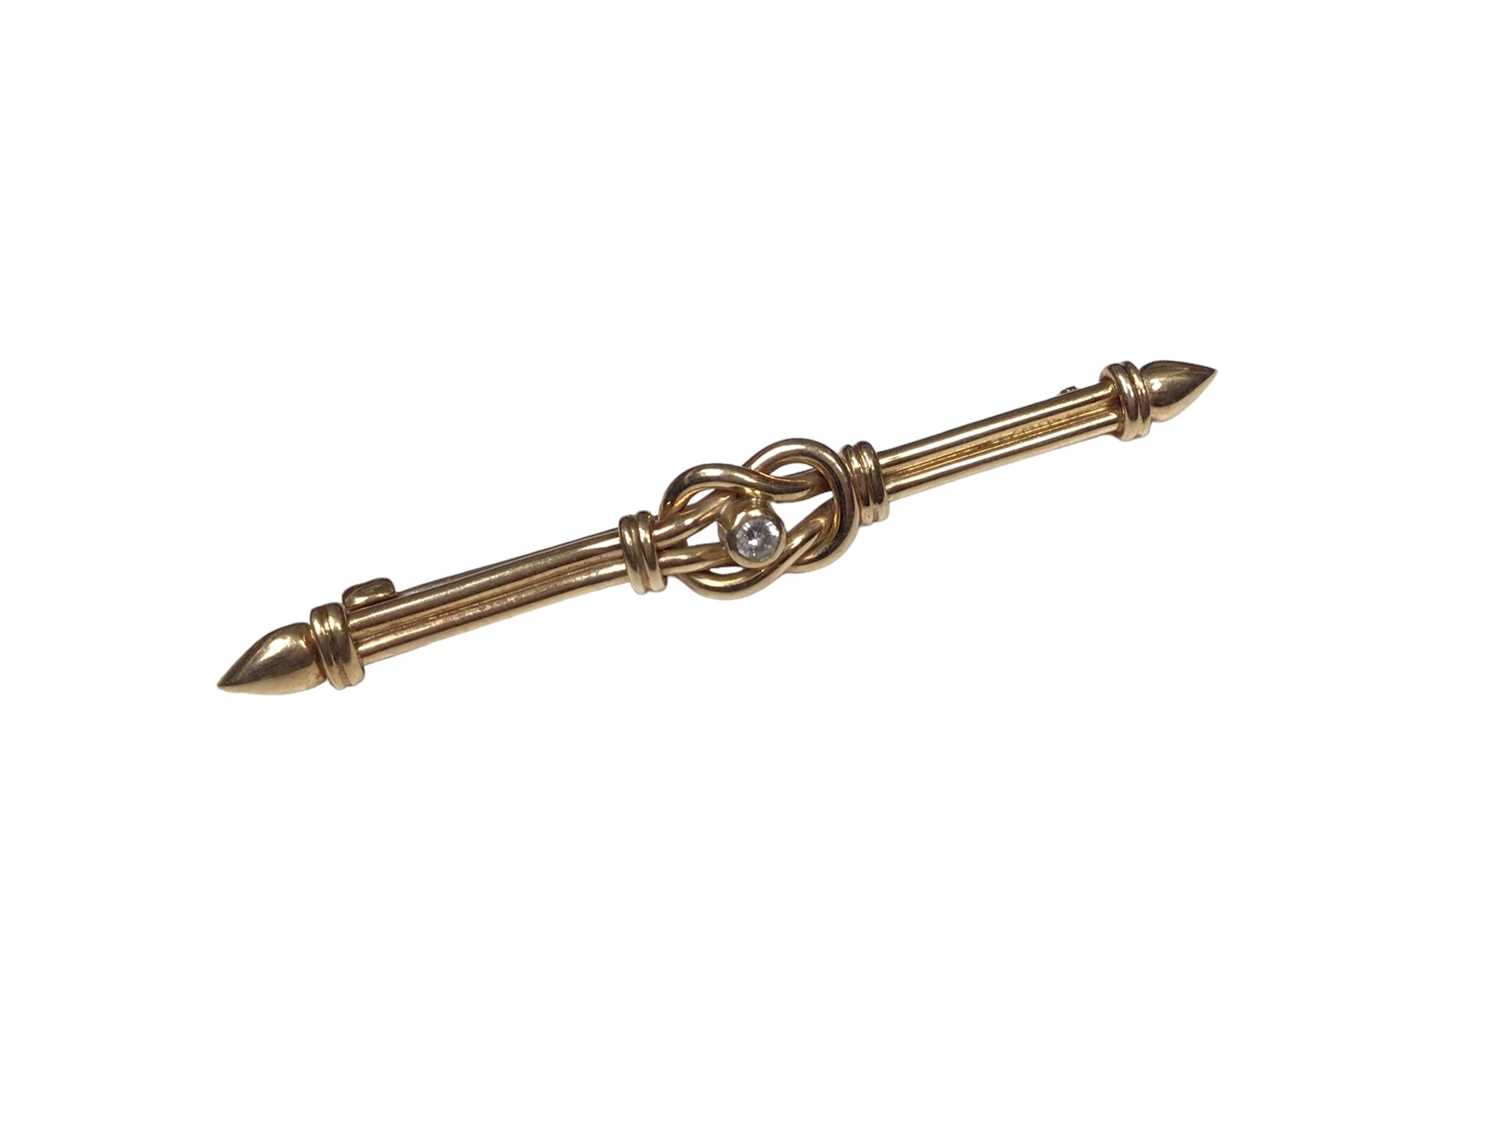 Edwardian style 9ct gold and diamond bar brooch with lovers knot design